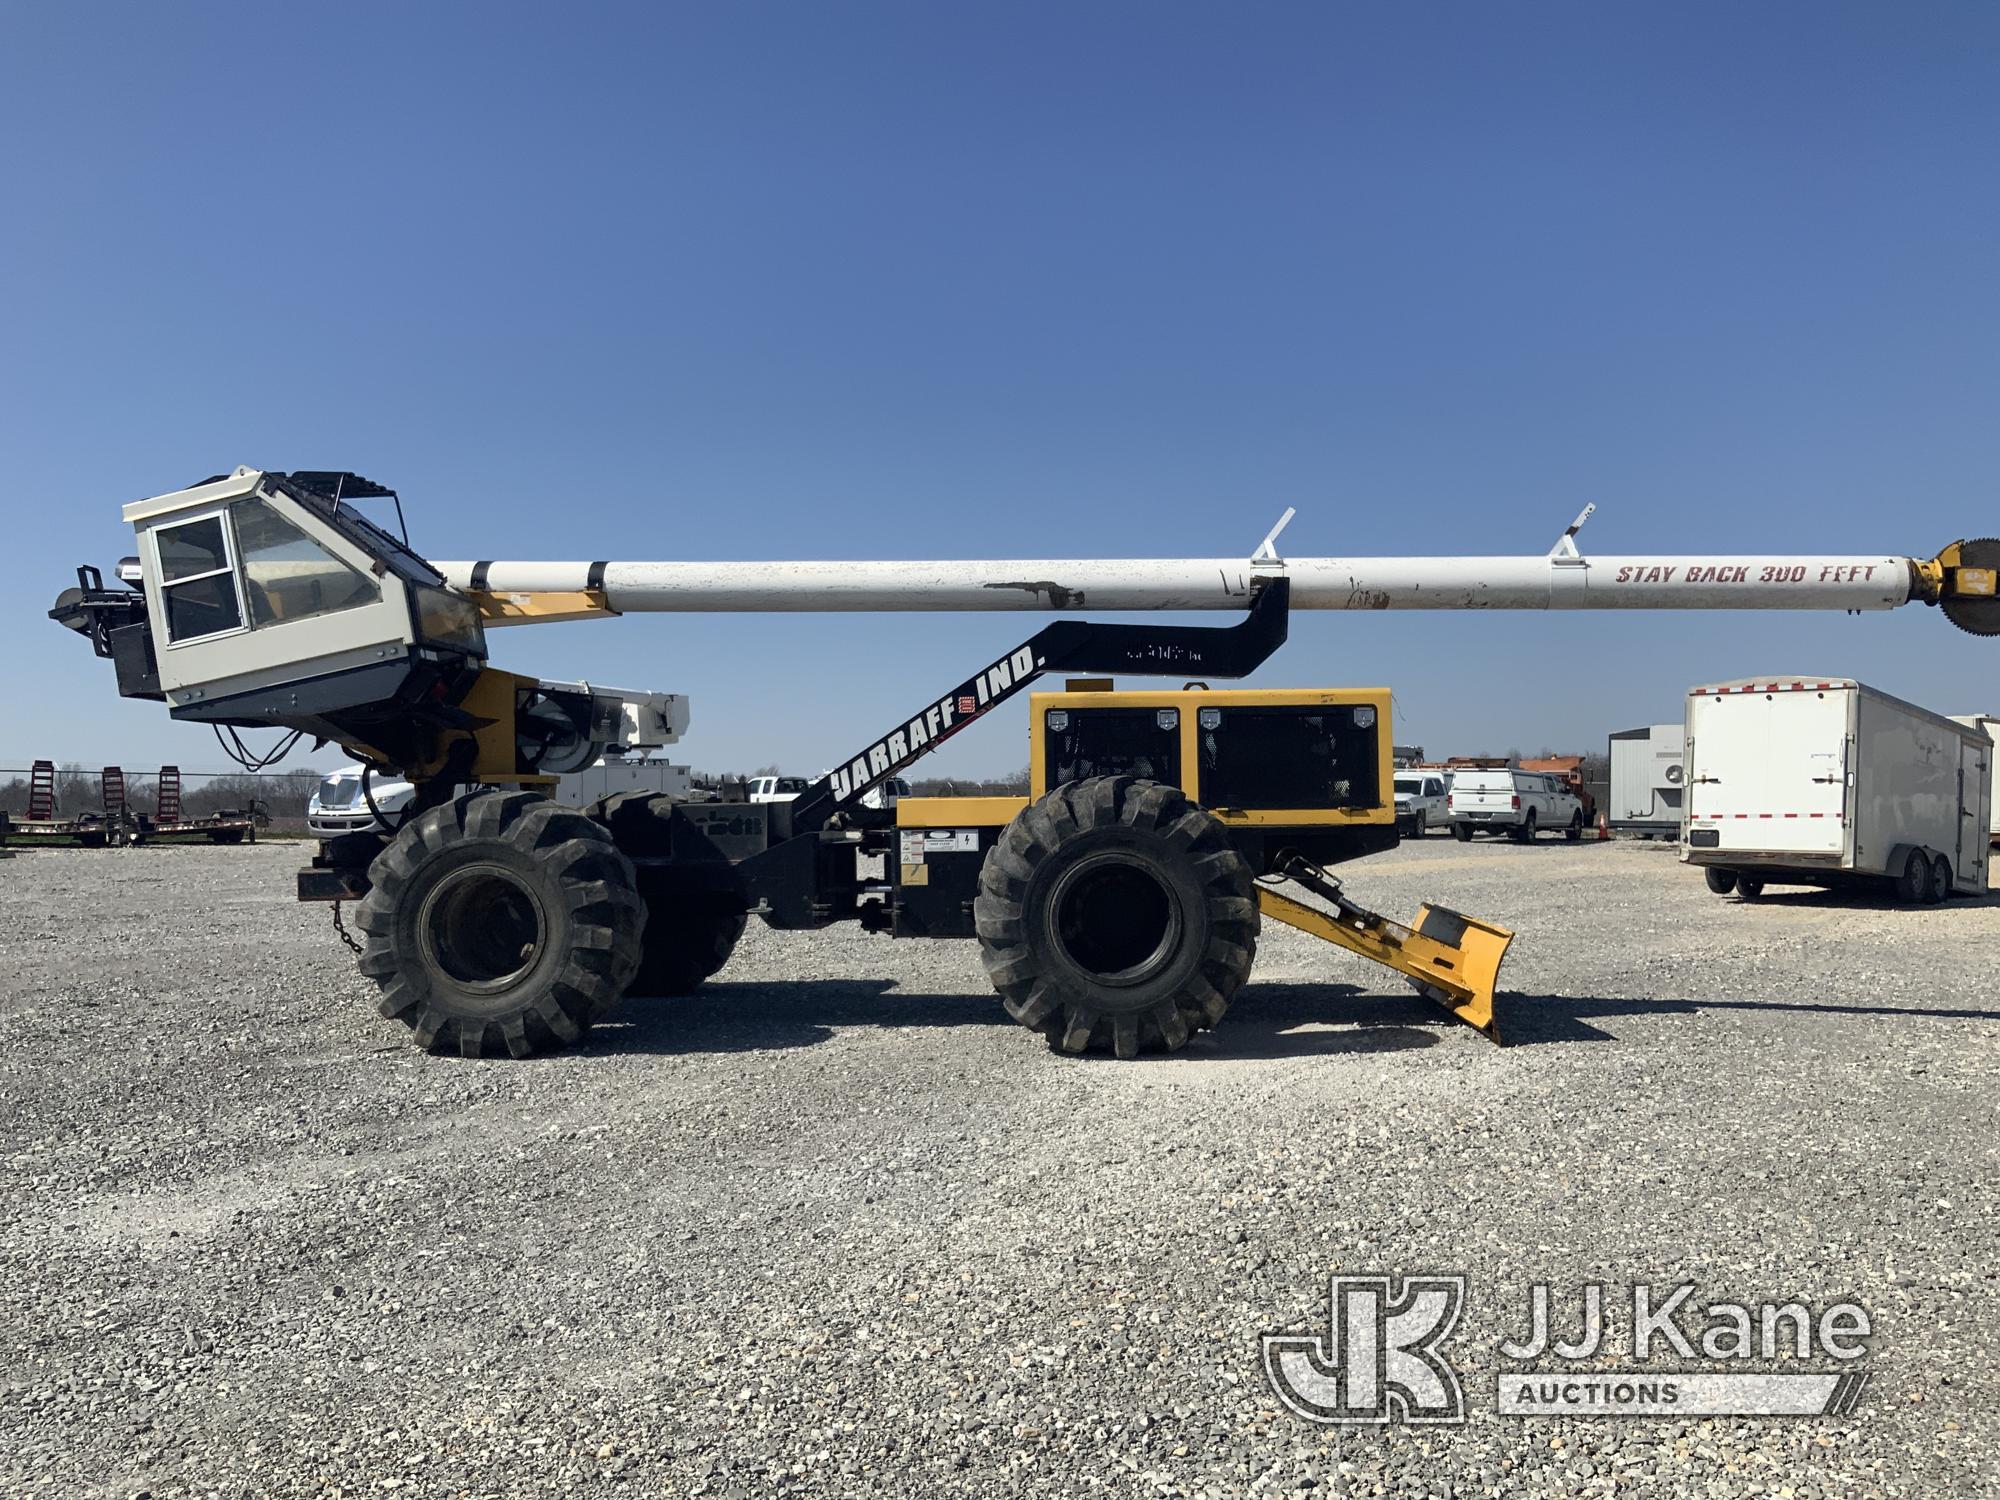 (Hawk Point, MO) 2010 Jarraff 4 Wheel Drive Articulating Rubber Tired Tree Saw Runs, Moves, Operates